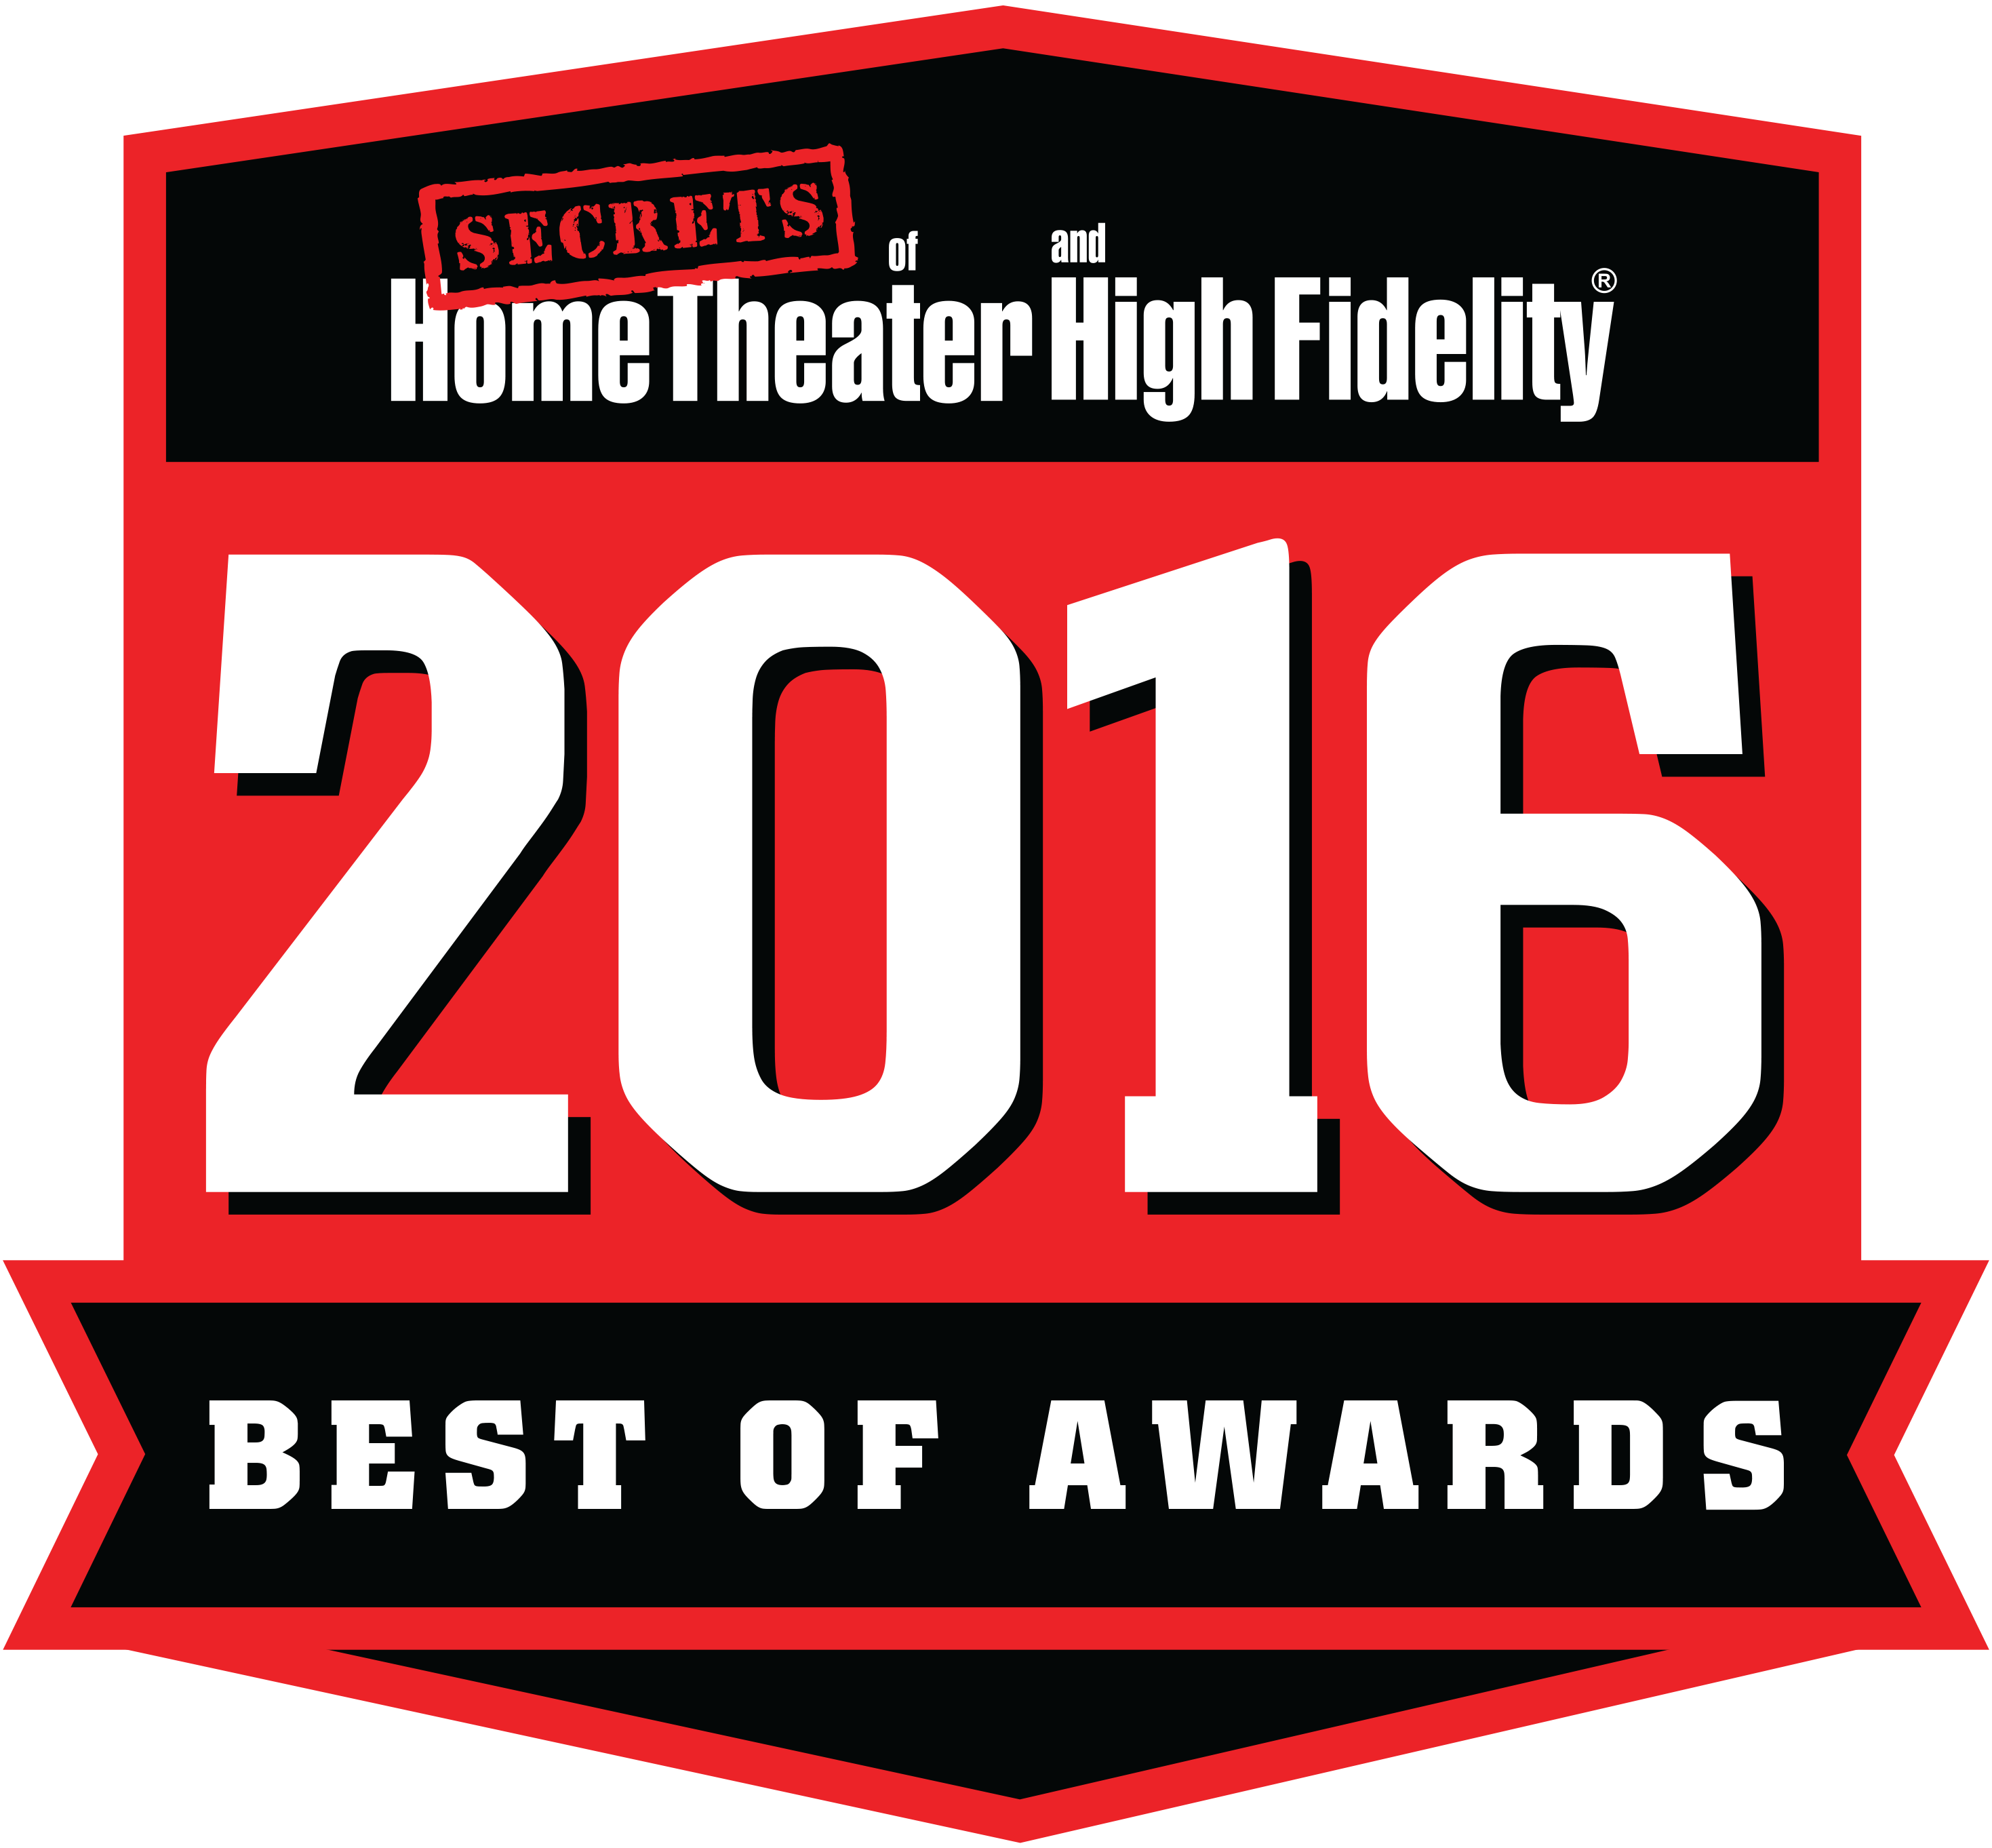 Secrets of Home Theater and High Fidelity - Best Of Awards 2016